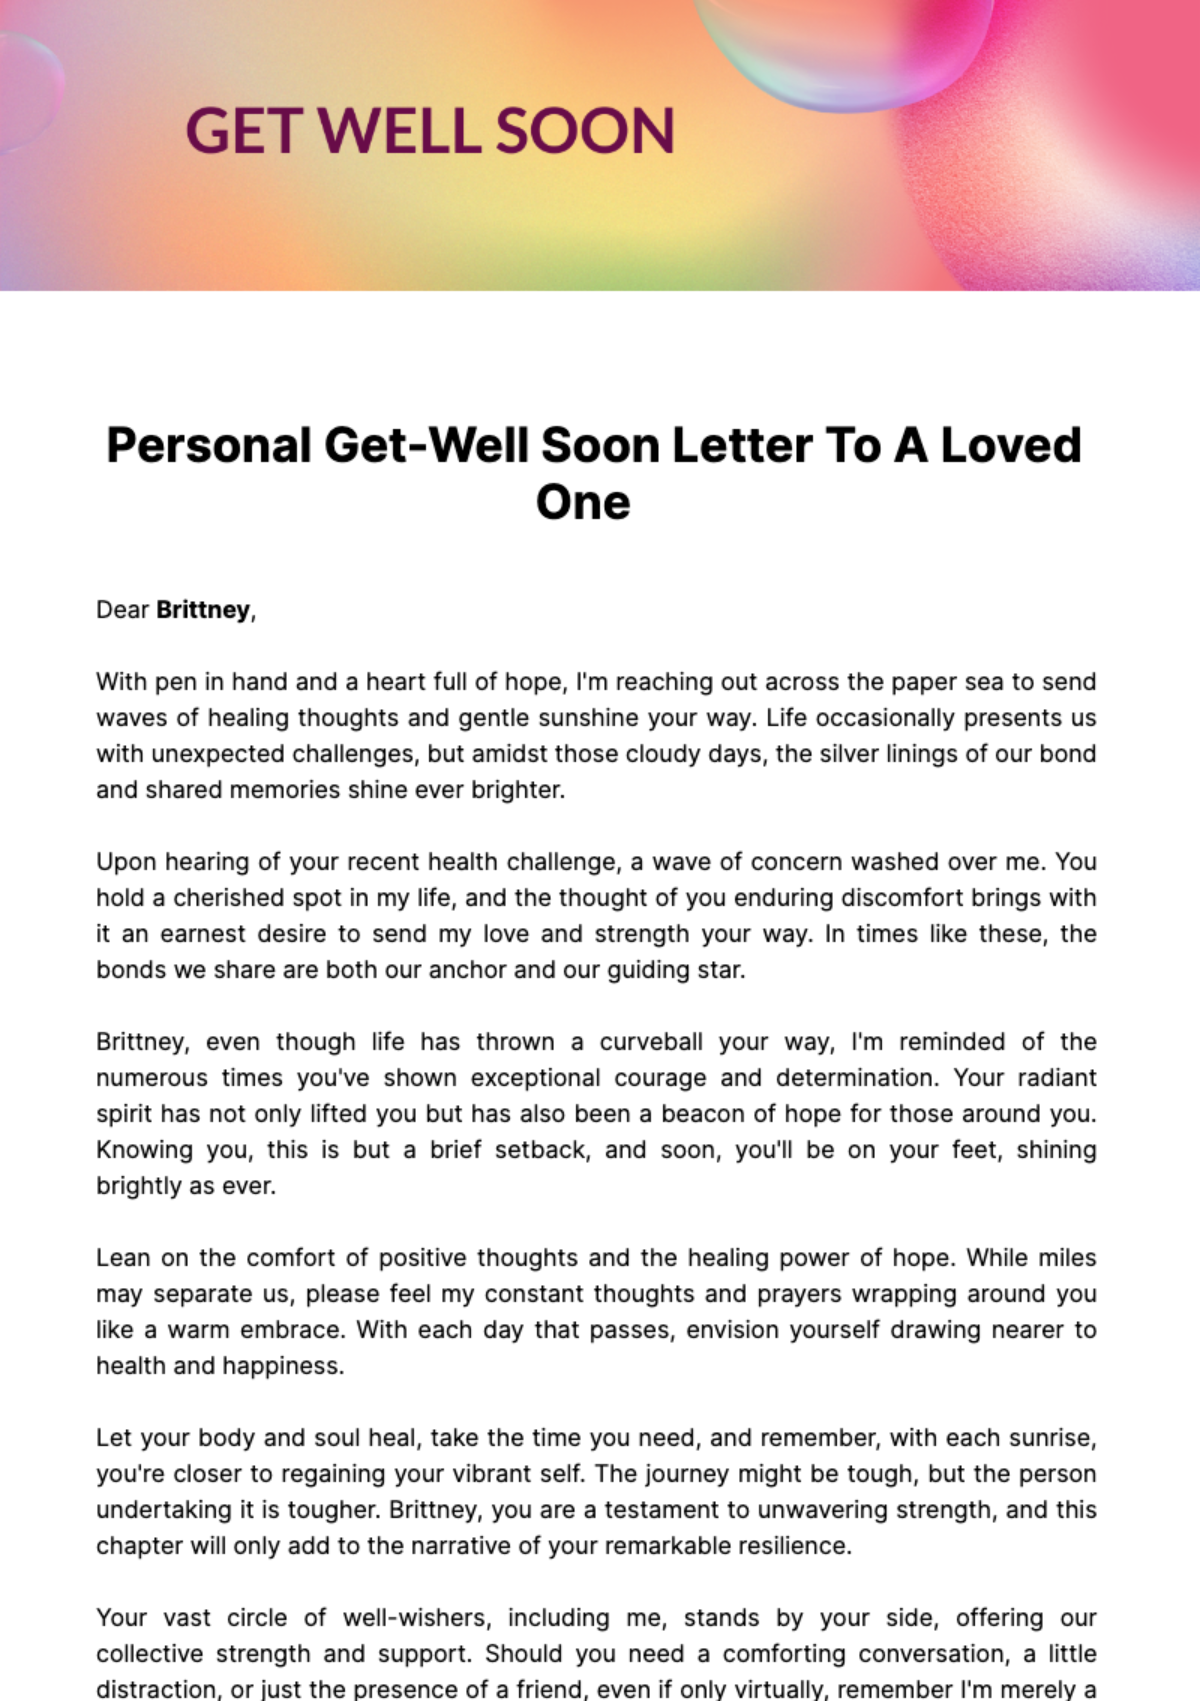 Personal Get-Well Soon Letter To A Loved One  Template 